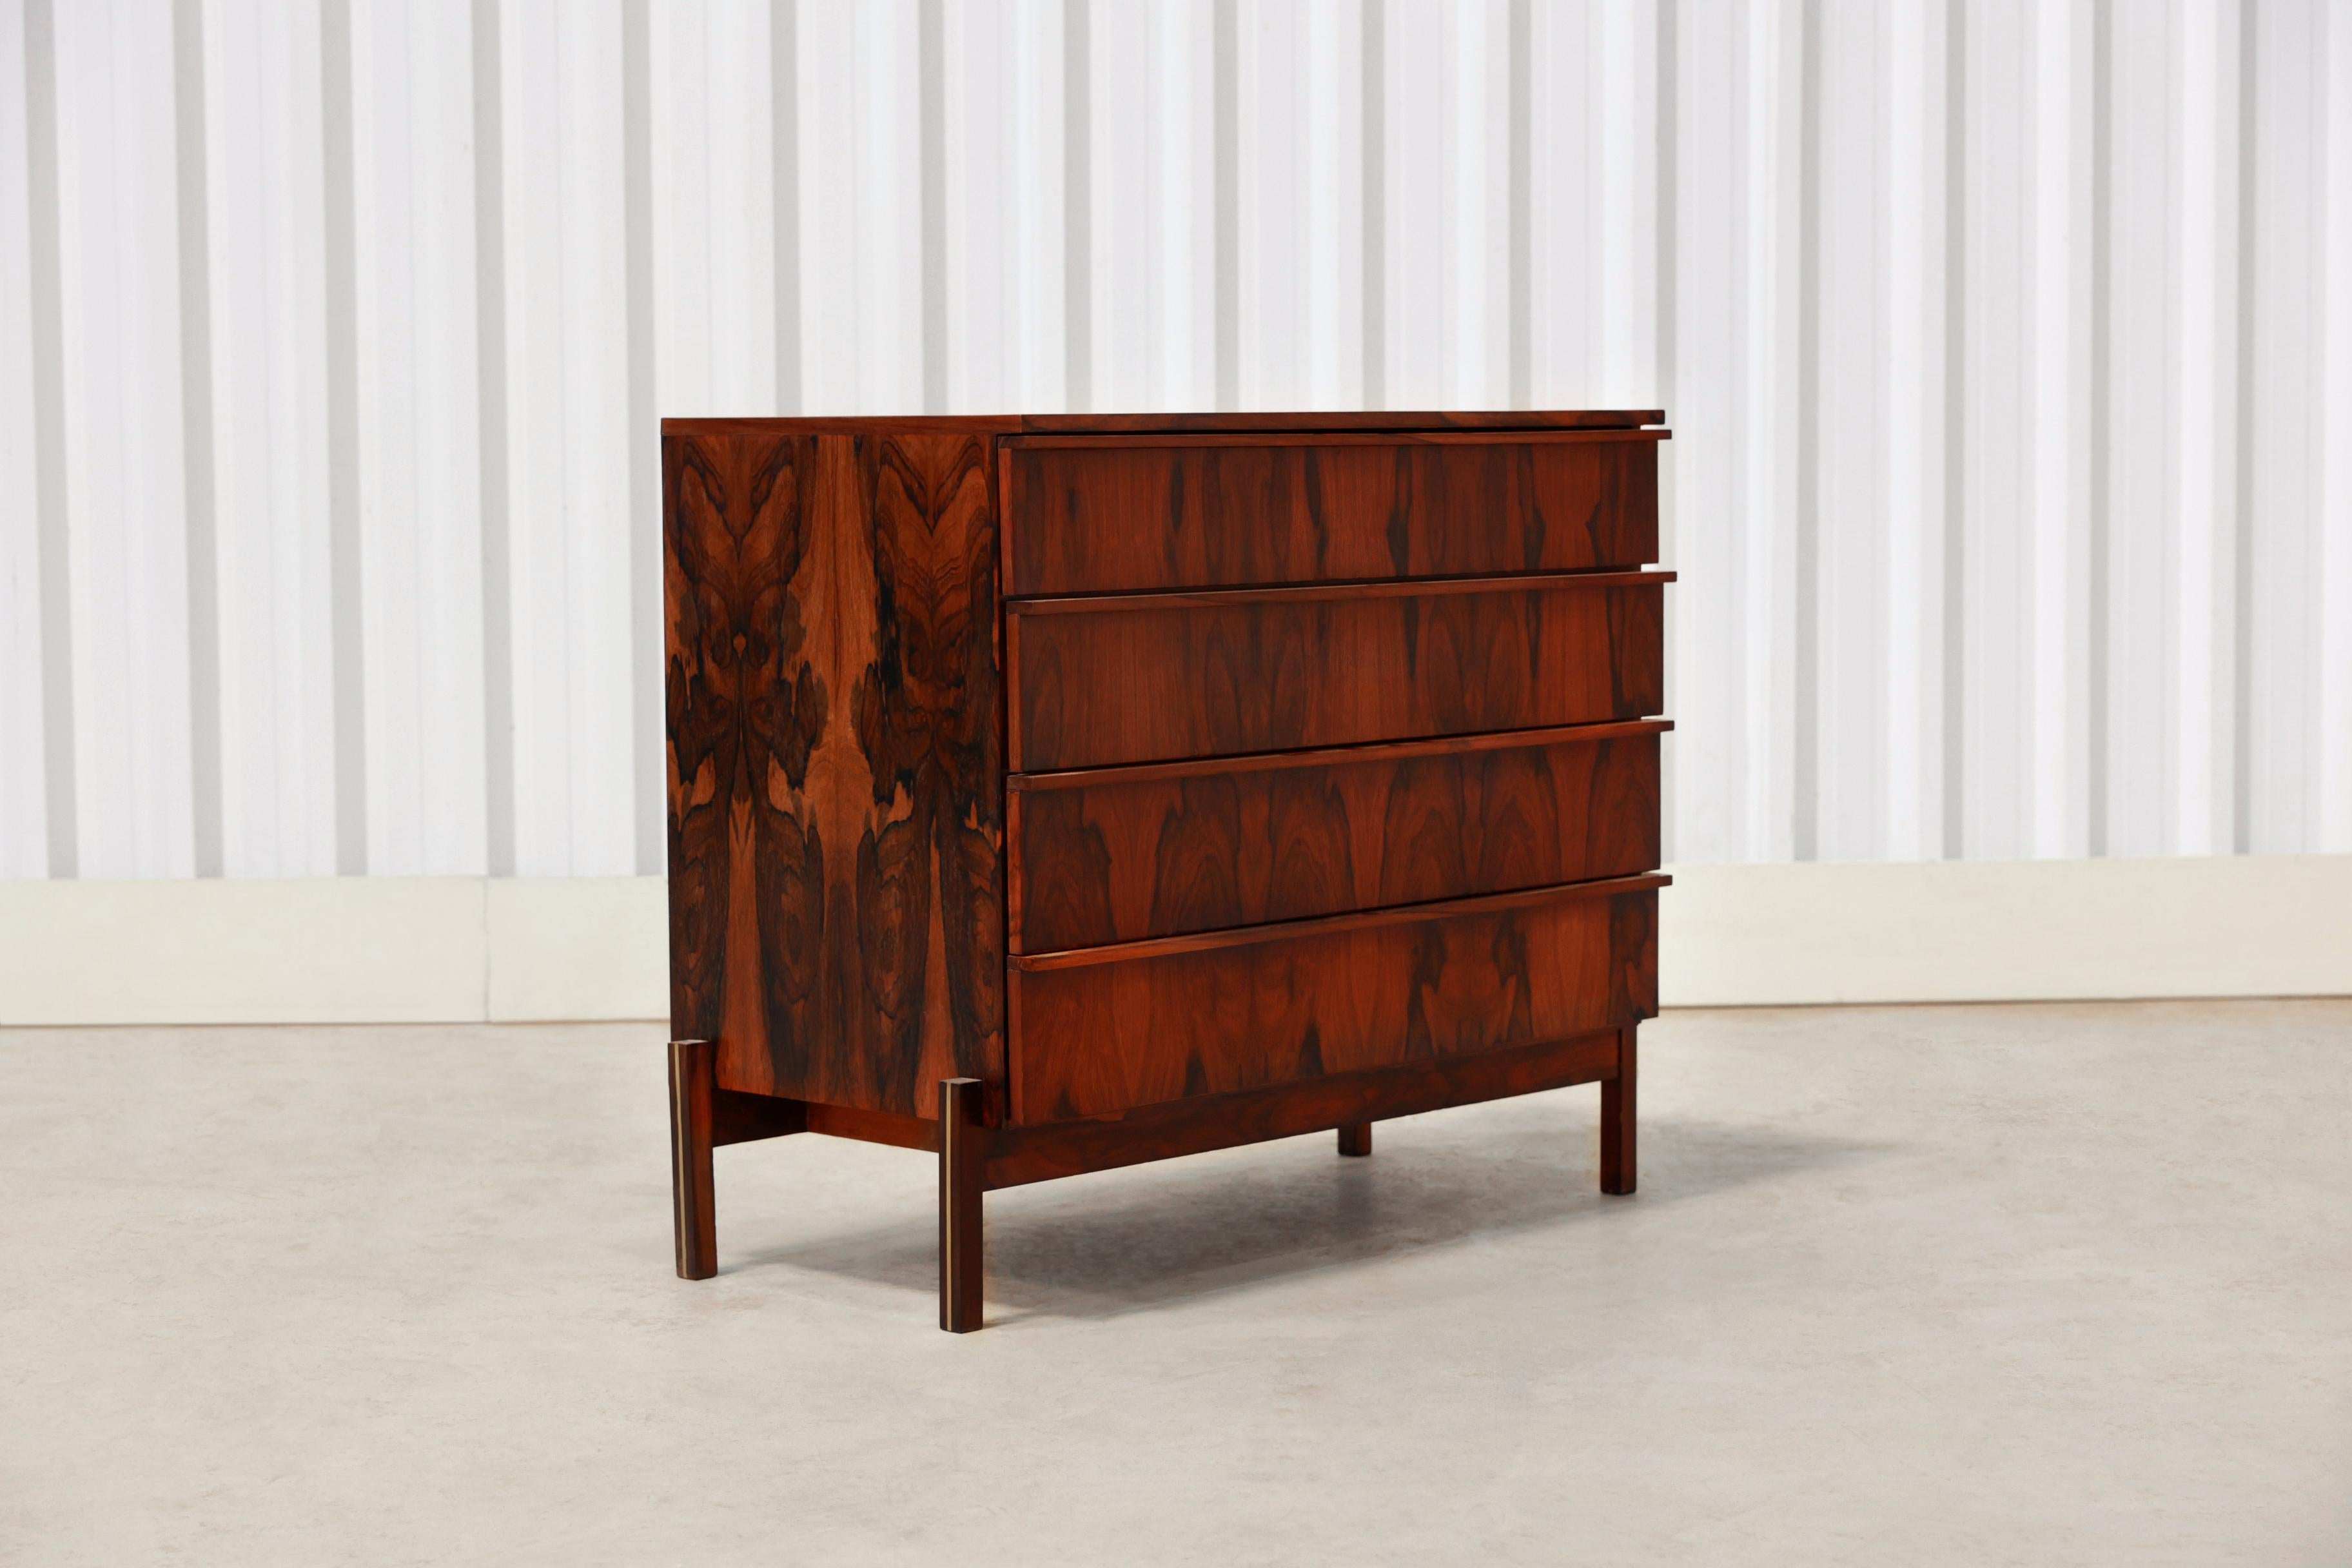 Brazilian Mid-century Modern Chest of Drawers in Hardwood by Cimo, Brazil